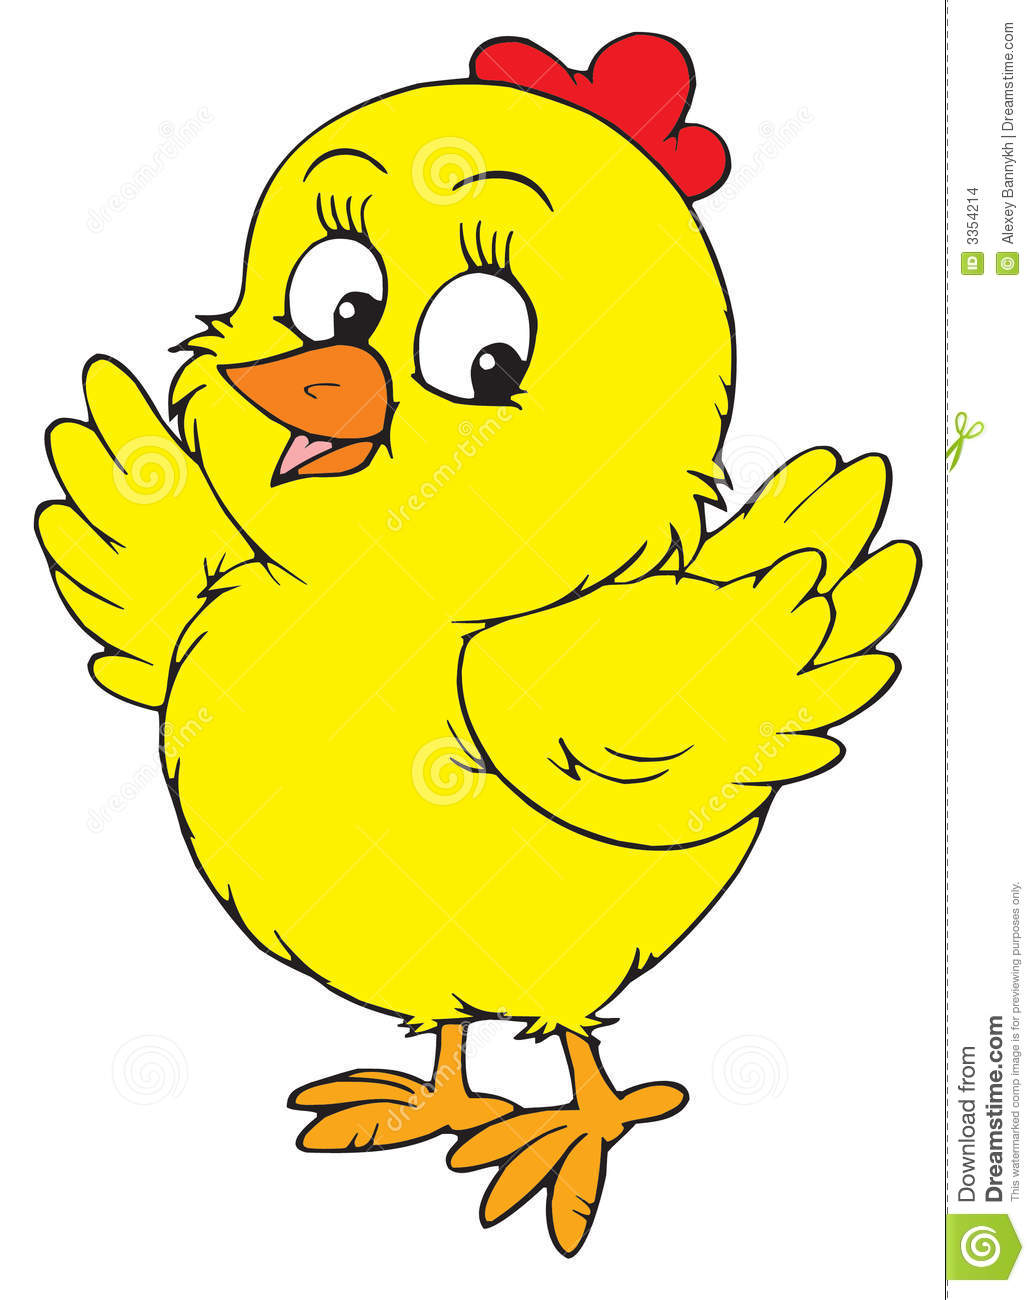 Yellow Chick  Vector Clip Art  Stock Images   Image  3354214